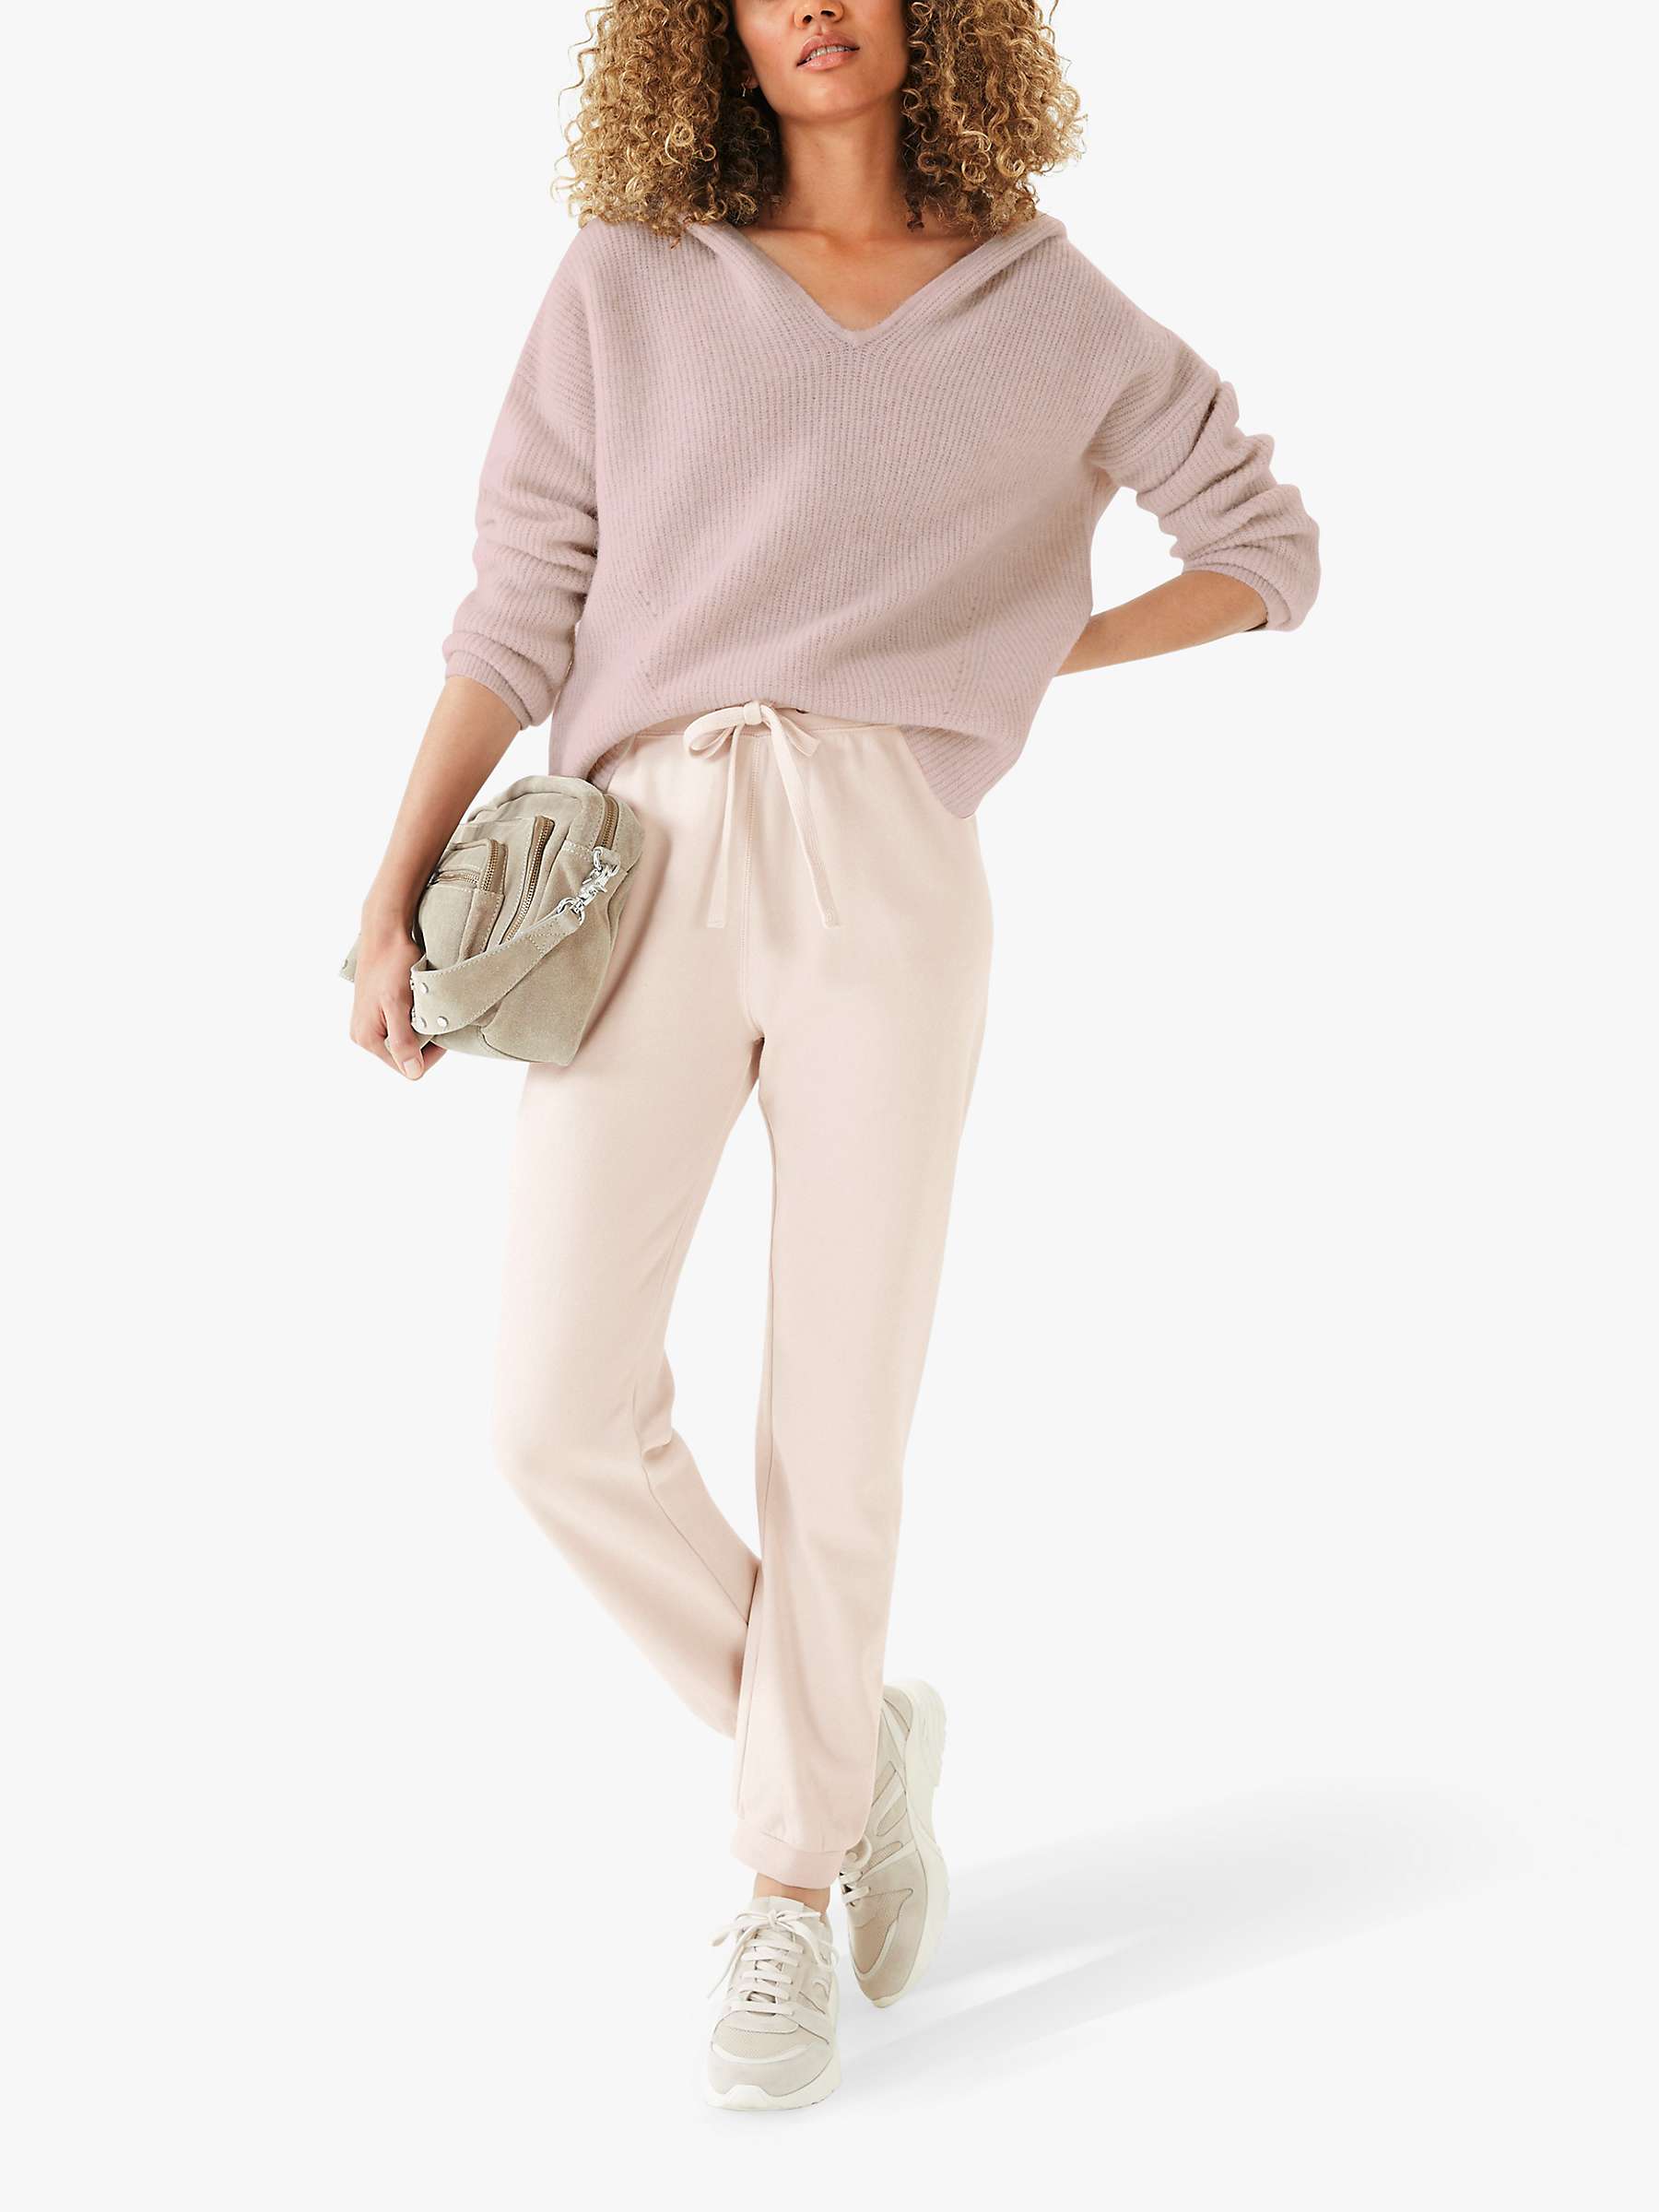 Buy hush Soft Knit Loungwear Hoodie Online at johnlewis.com